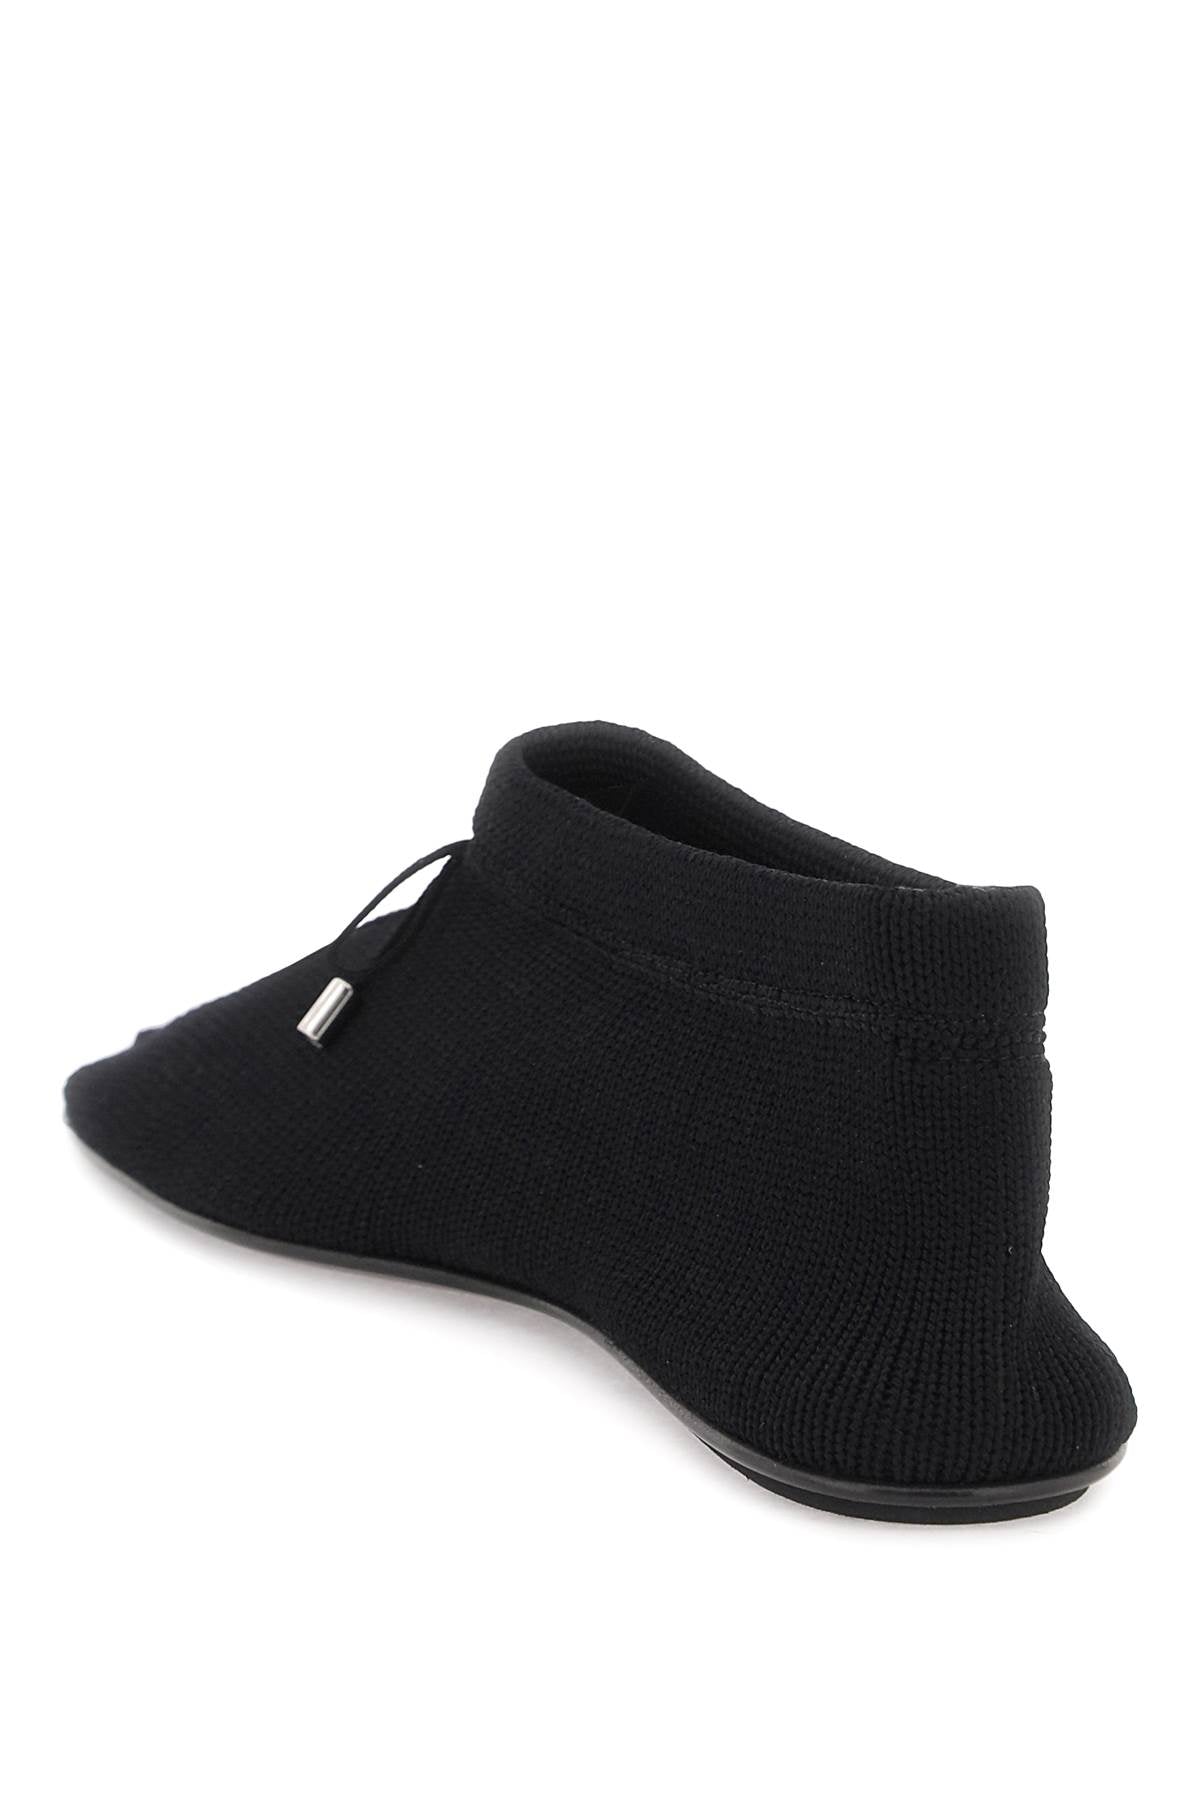 Toteme Toteme knitted ballet flats